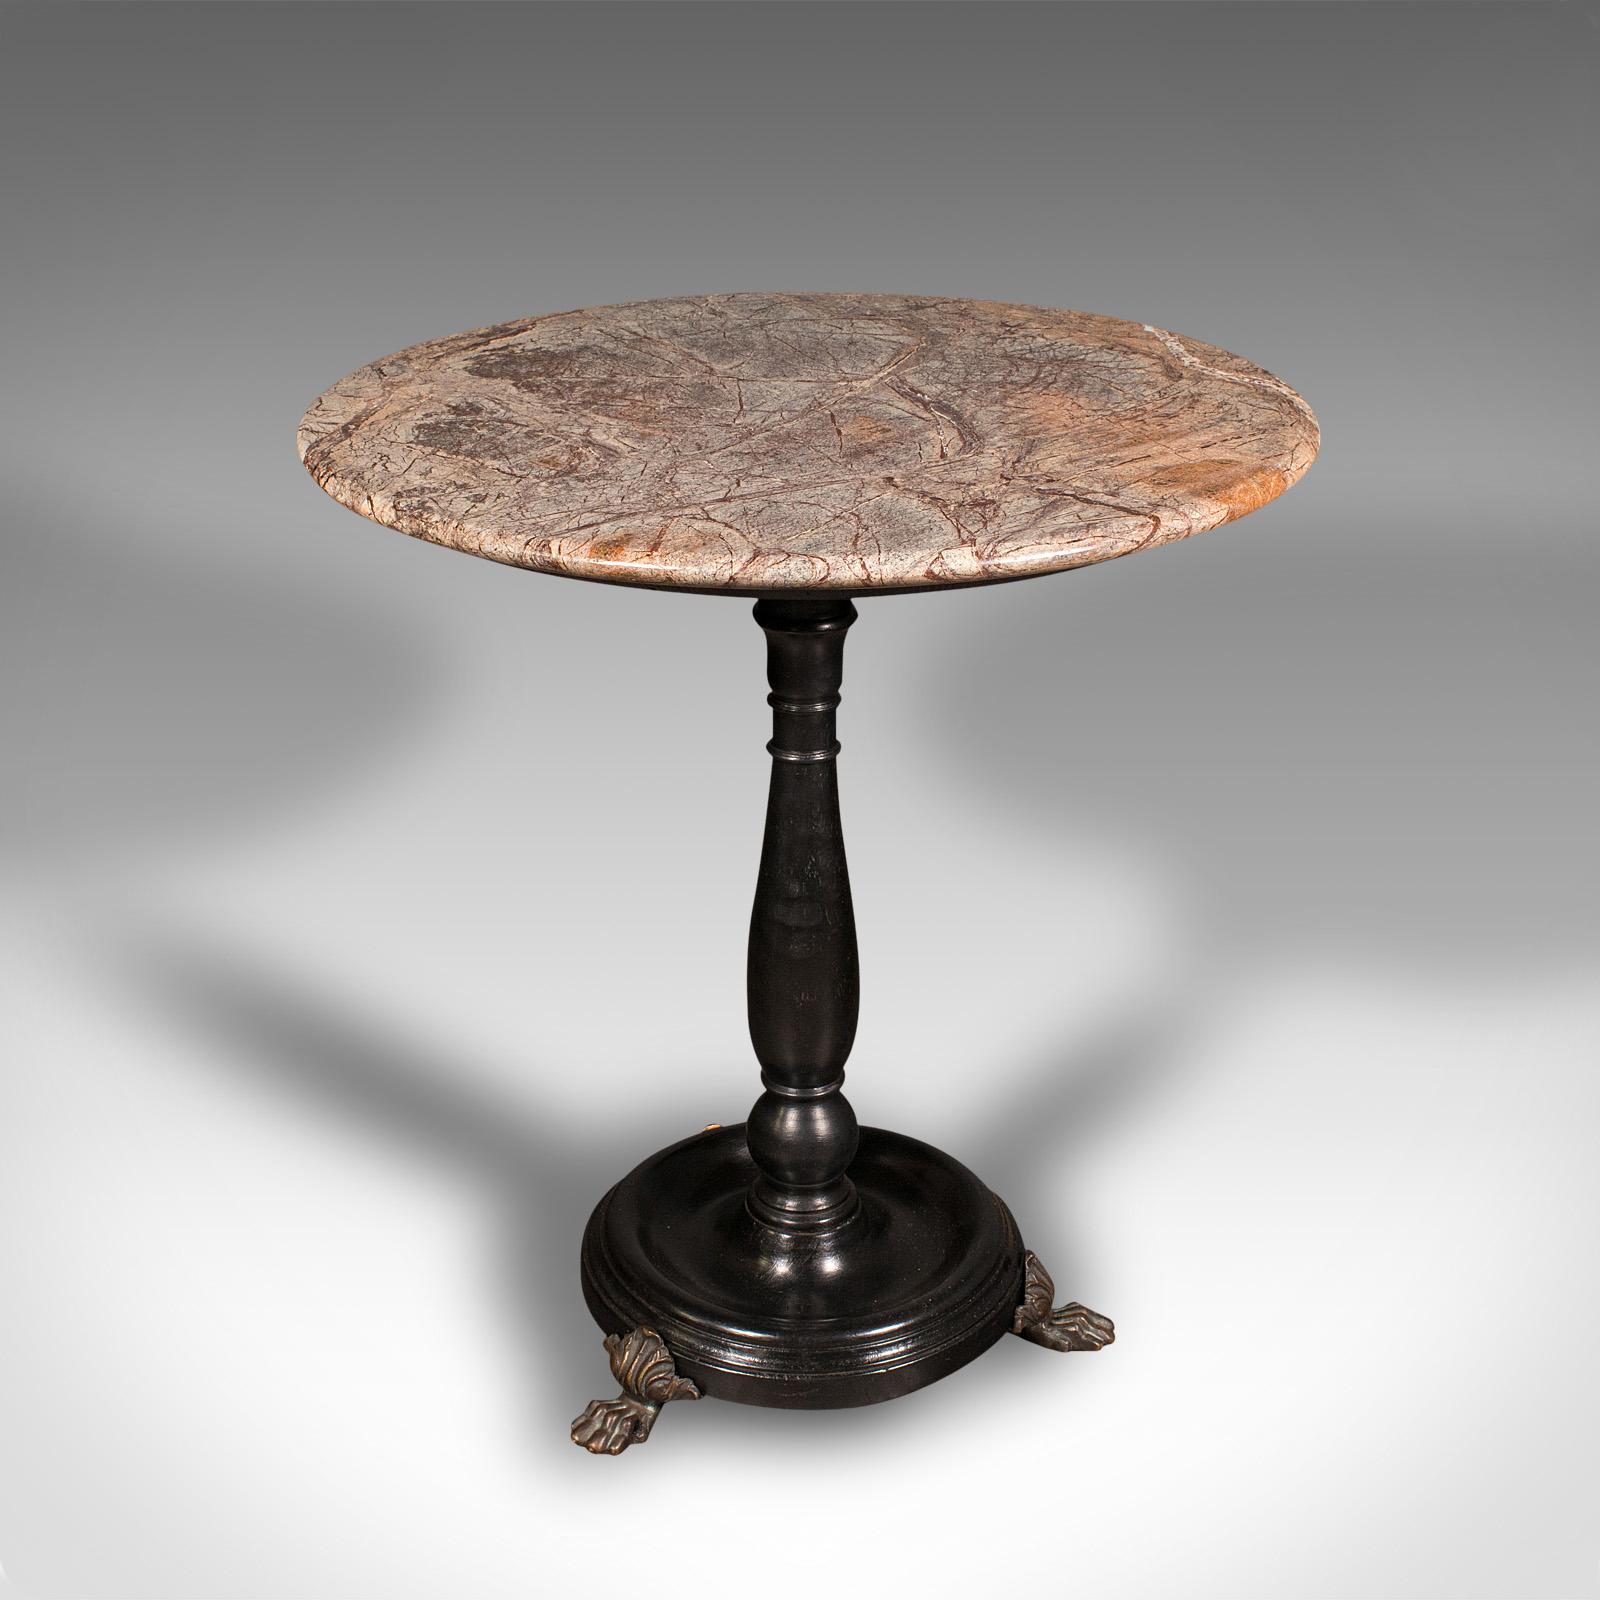 Antique Country House Lamp Table, English, Marble, Georgian Revival, Victorian In Good Condition For Sale In Hele, Devon, GB